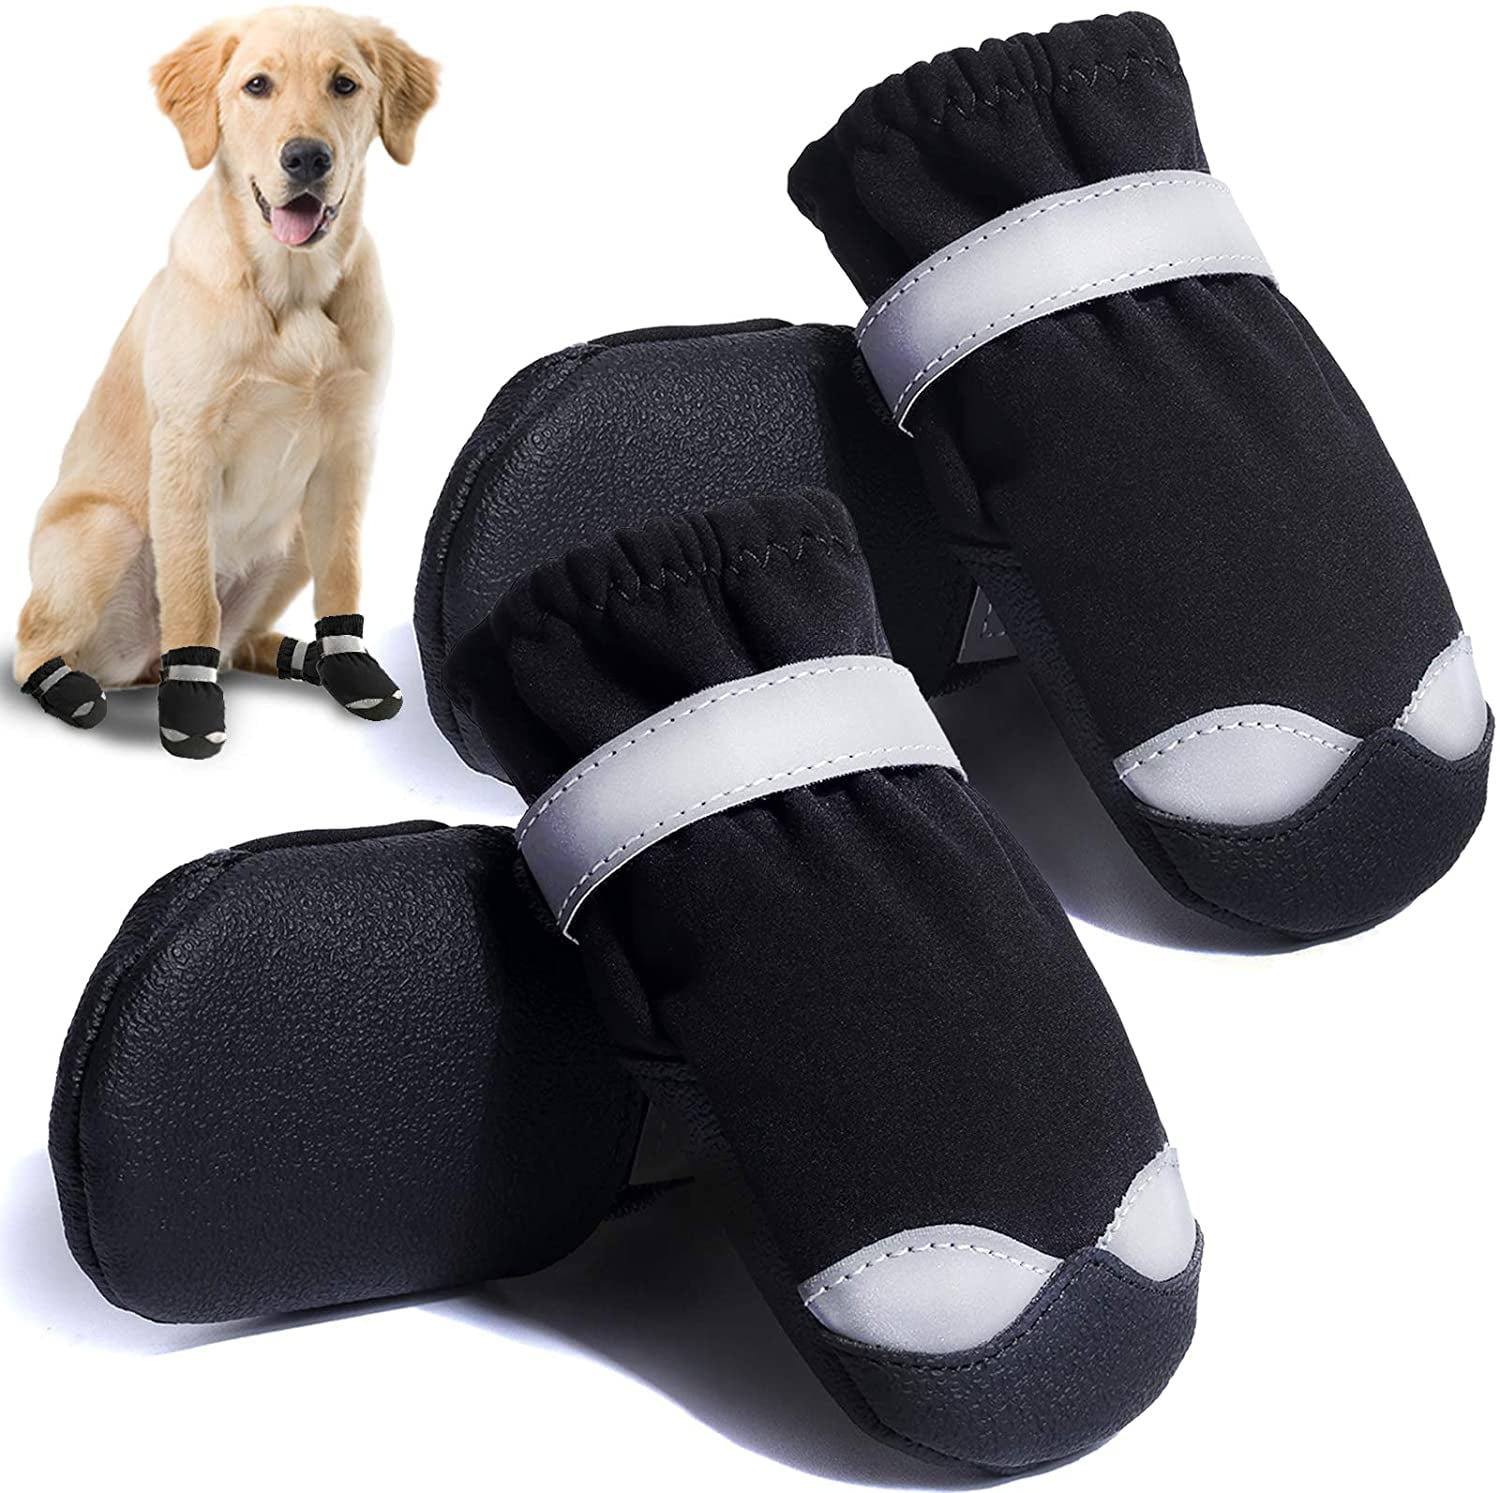 Anti-Slip Dog Boots and Paw Protector for Small Medium Dogs 4PCS Dog Shoes Dog Booties with Reflective Straps for Hot Pavement 